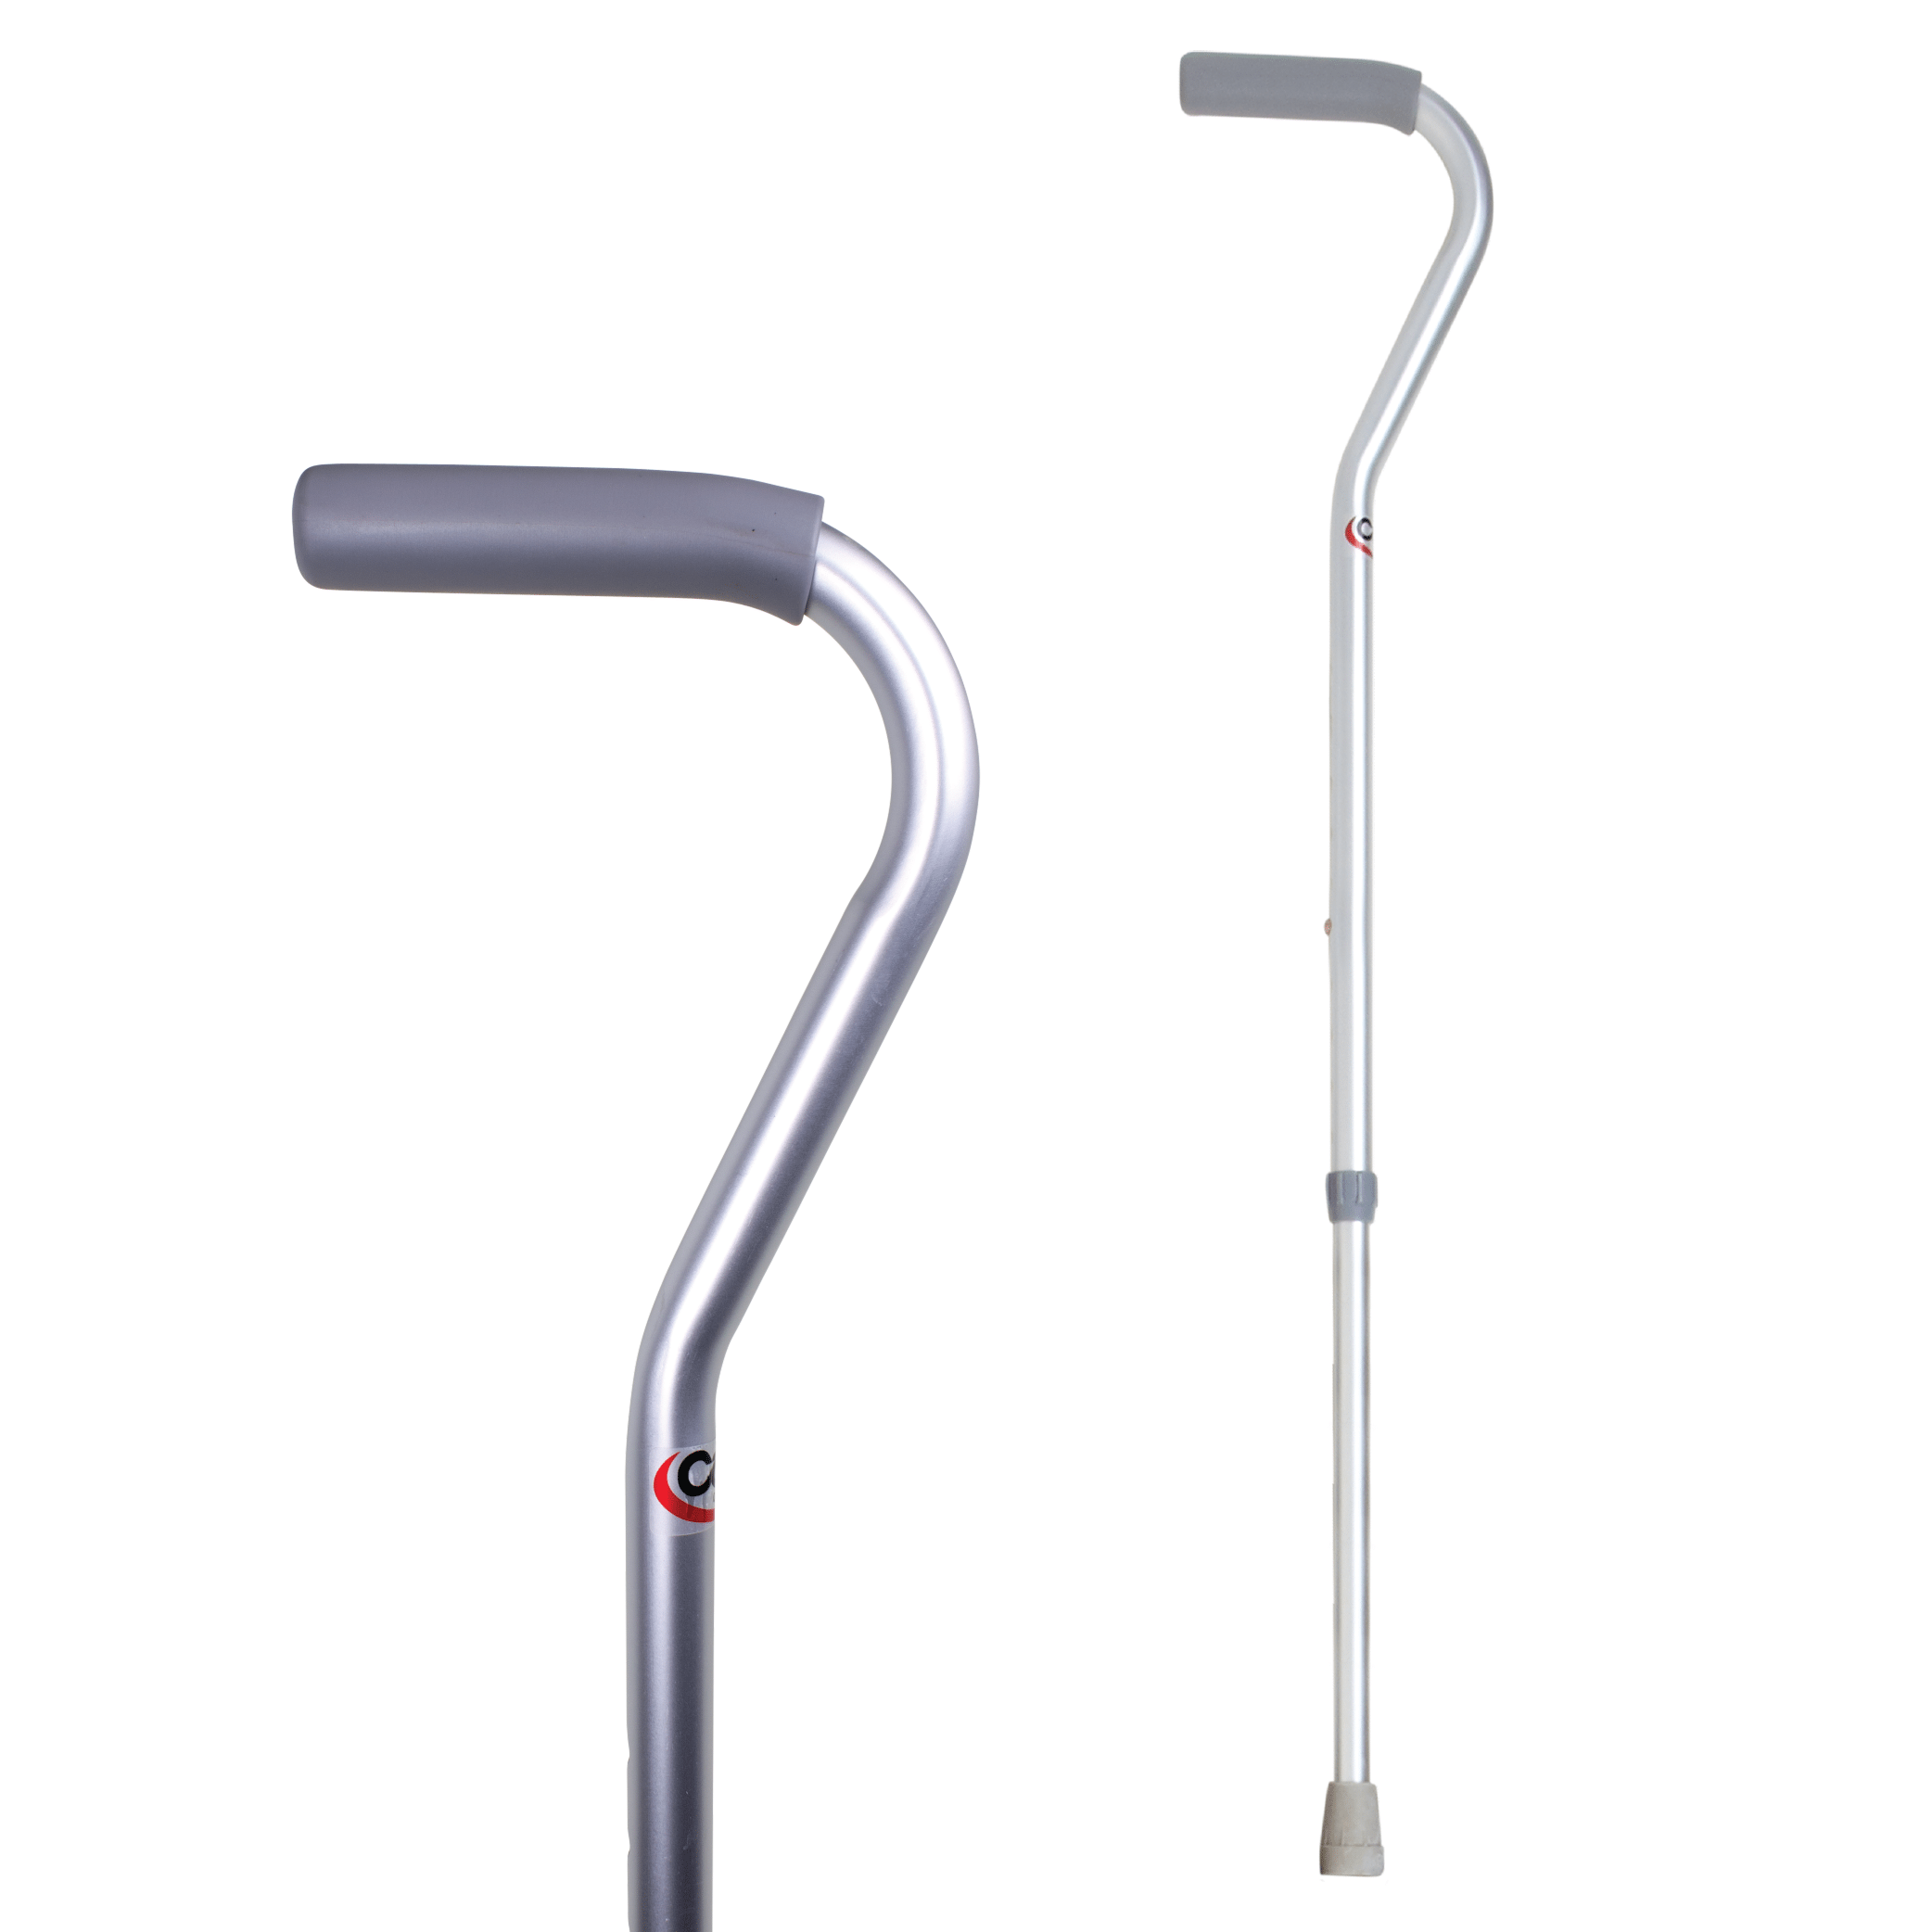 Walking Canes for Ladies: A Functional Fashion Accessory, by Classy  Walking Canes